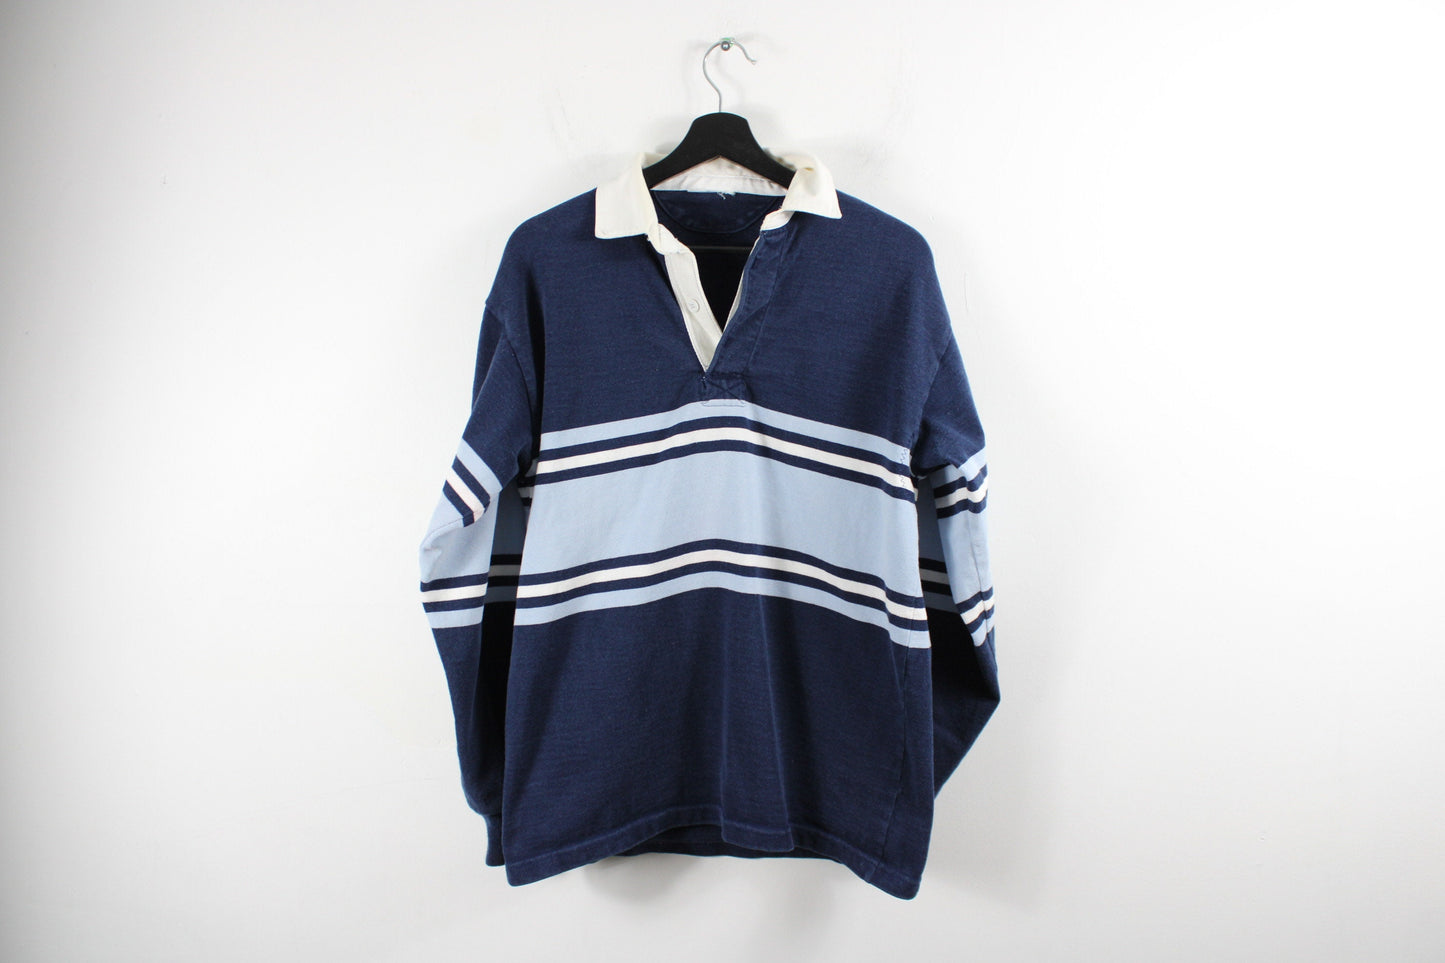 Polo Rugby Shirt / 90s Vintage Barbarian Top / Hip Hop Clothing / Streetwear